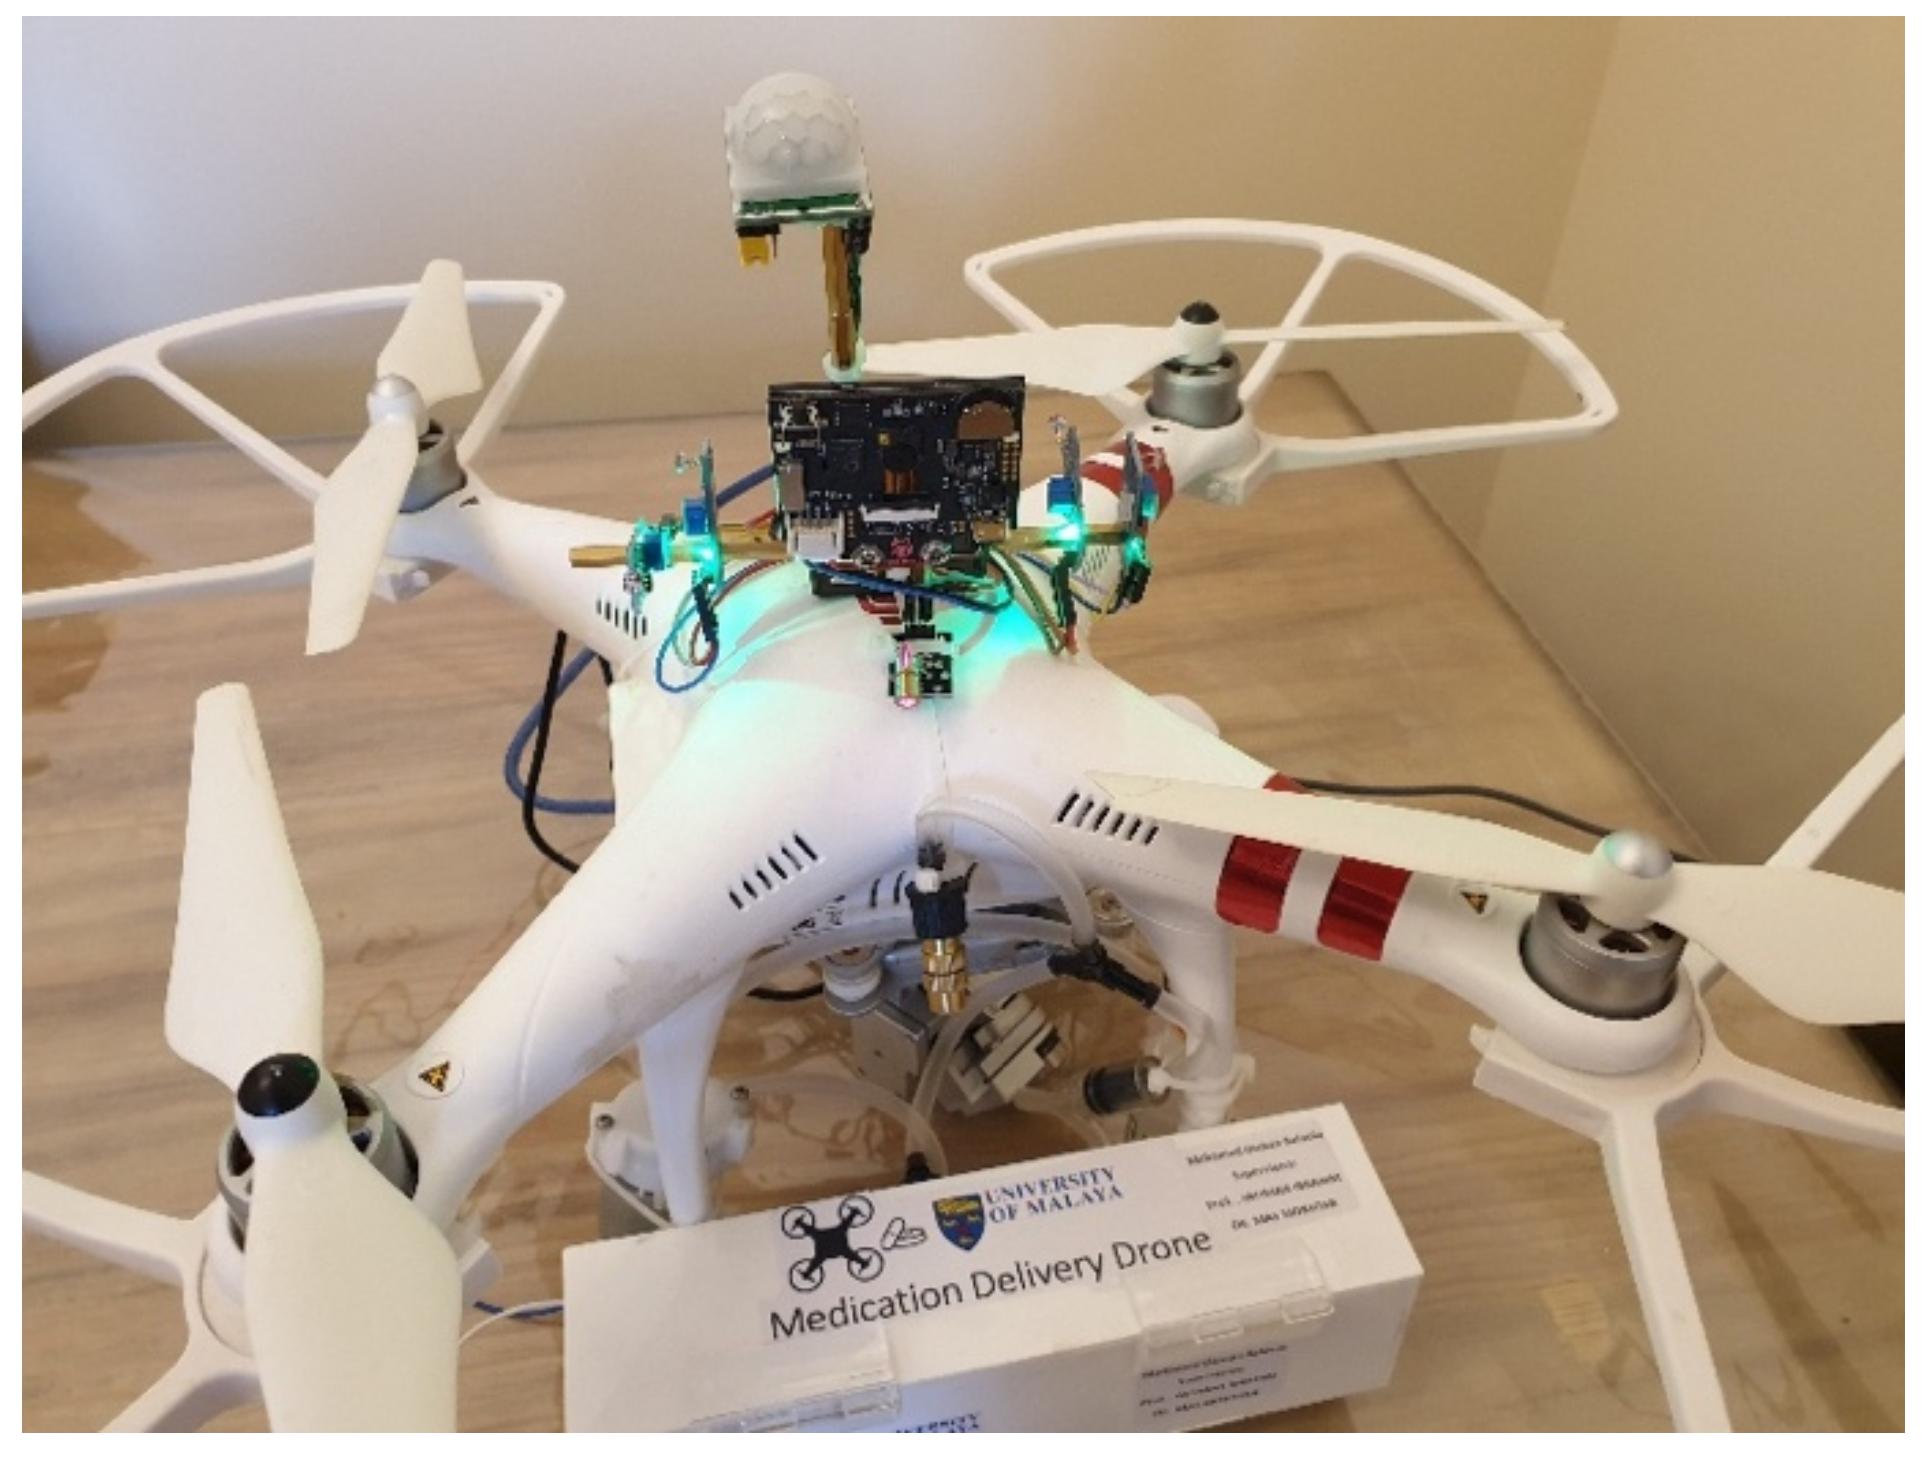 tendens hobby høst Sensors | Free Full-Text | Optimization of Medication Delivery Drone with  IoT-Guidance Landing System Based on Direction and Intensity of Light